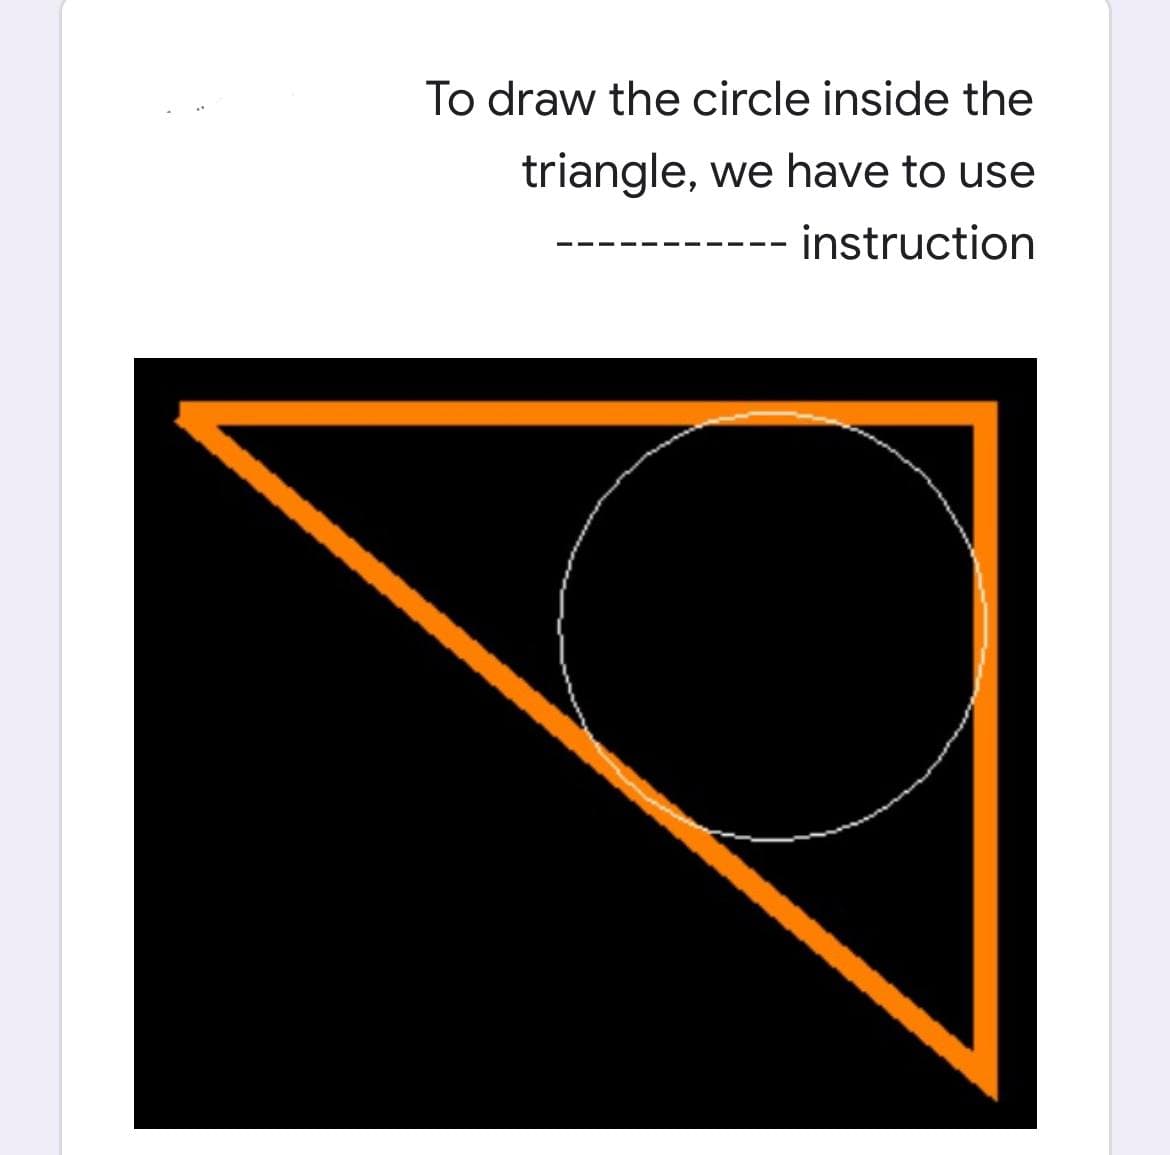 To draw the circle inside the
triangle, we have to use
instruction